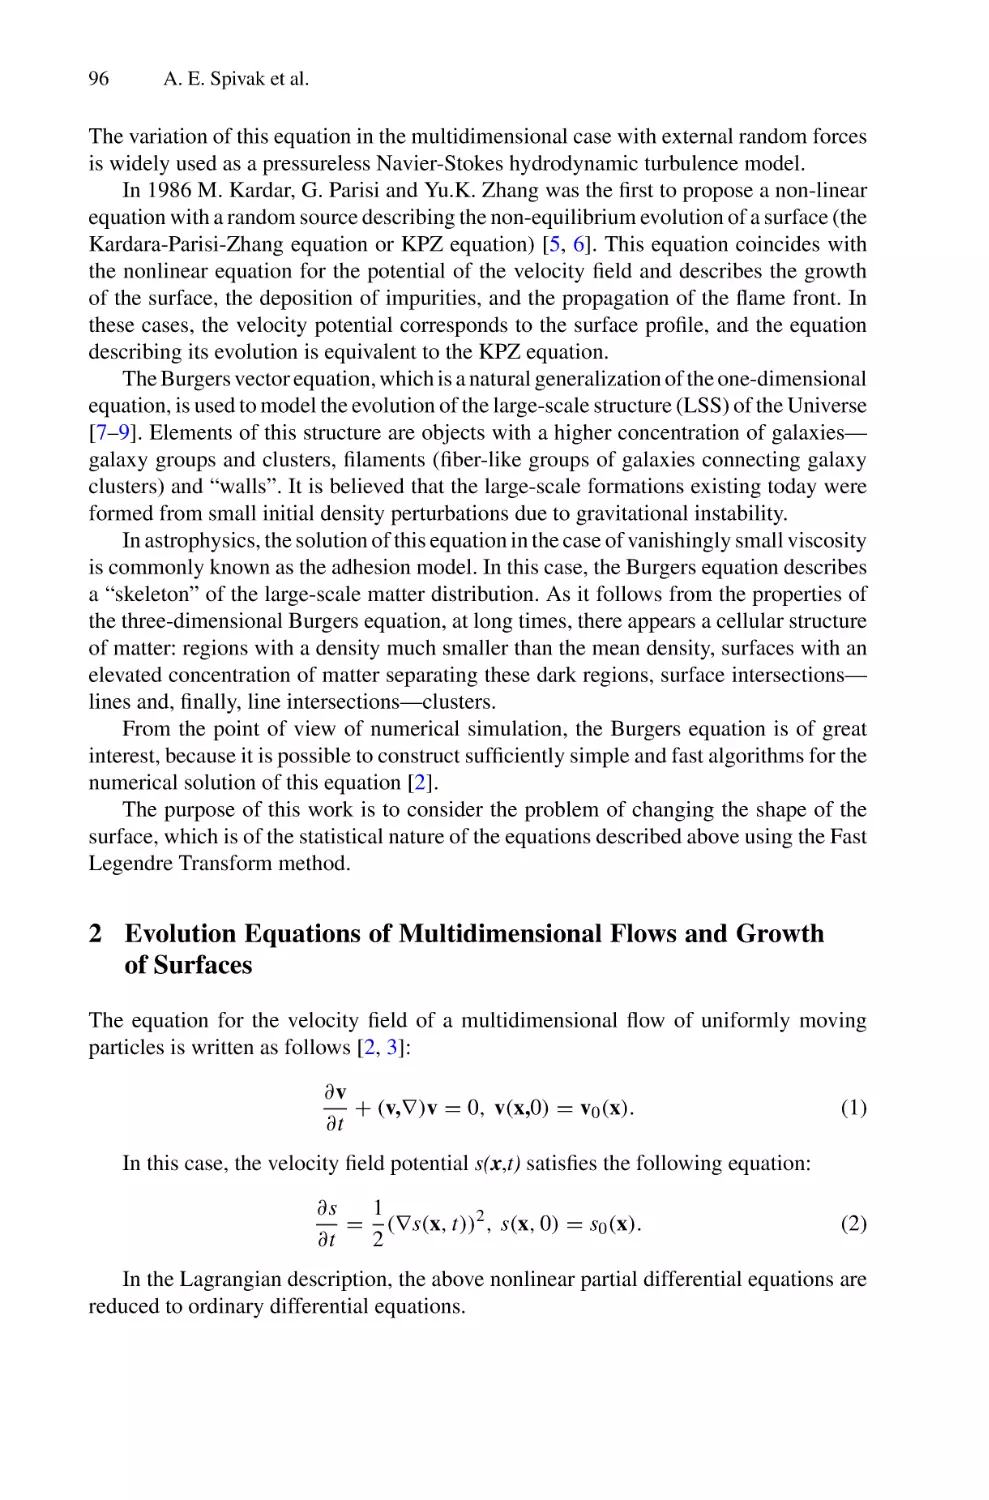 2 Evolution Equations of Multidimensional Flows and Growth of Surfaces